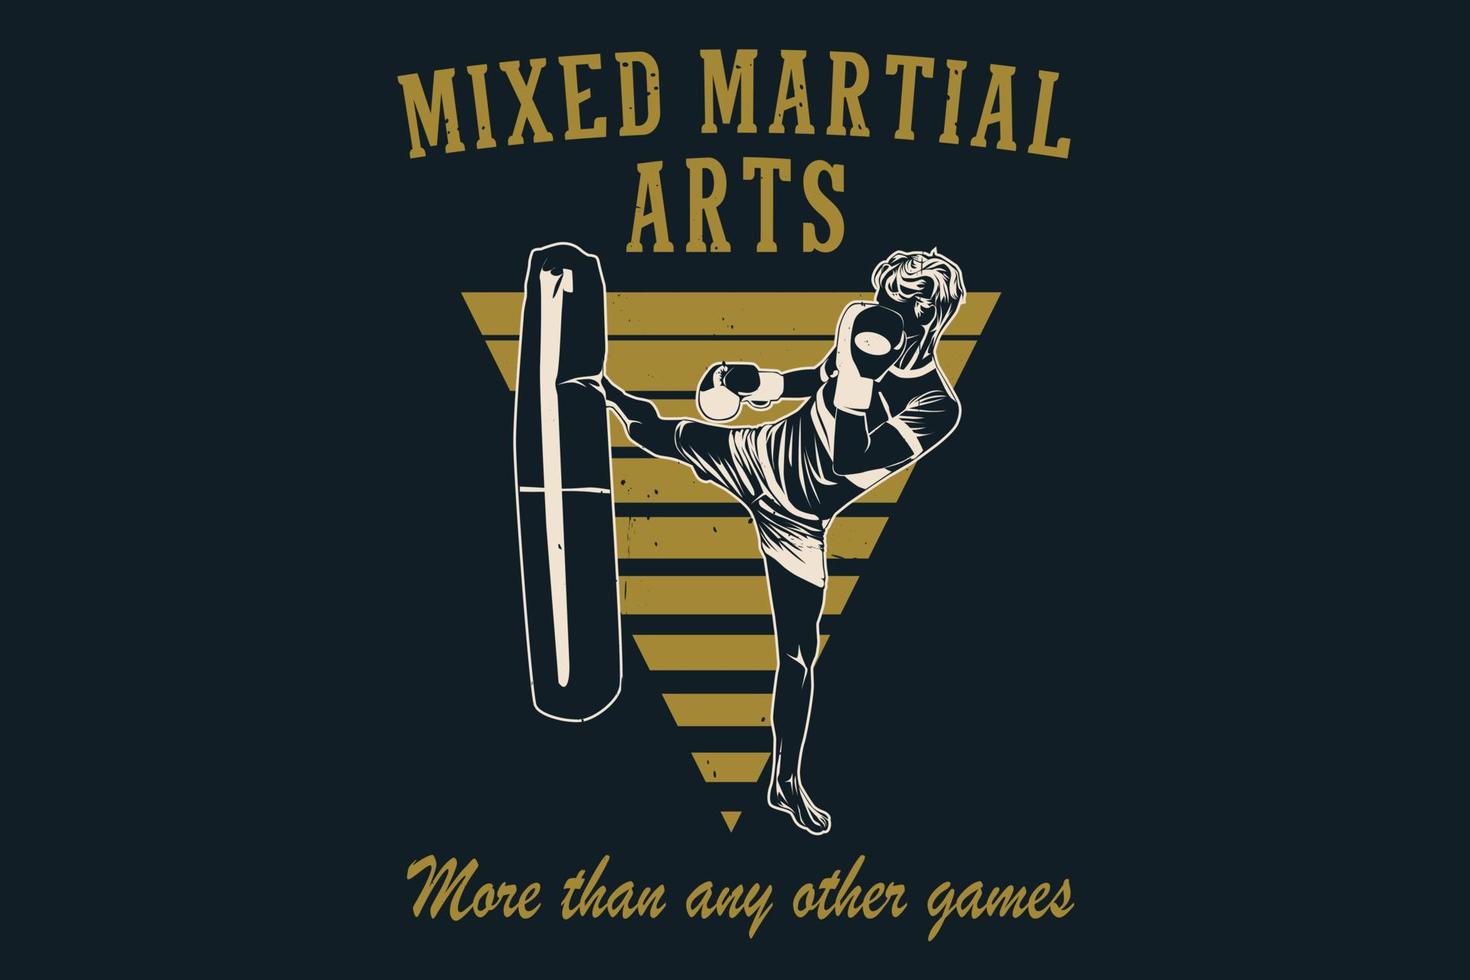 Mixed martial arts more than any other games silhouette design vector